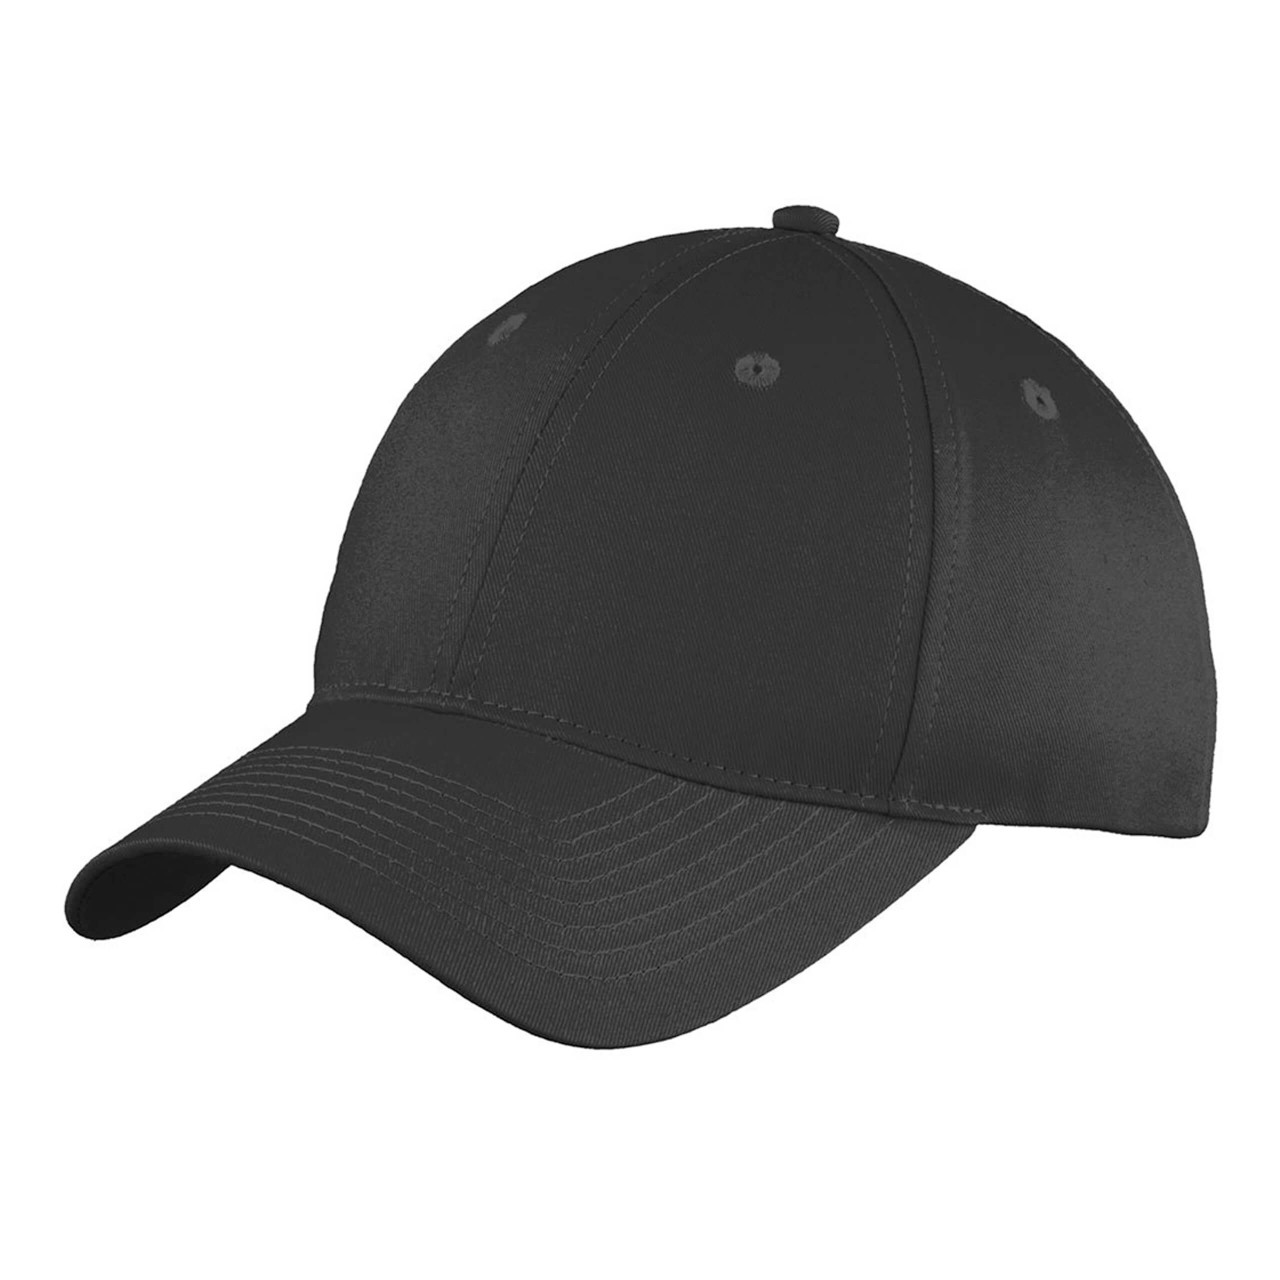 Black Unstructured Twill Baseball Cap Blank, Adult One Size Fits All